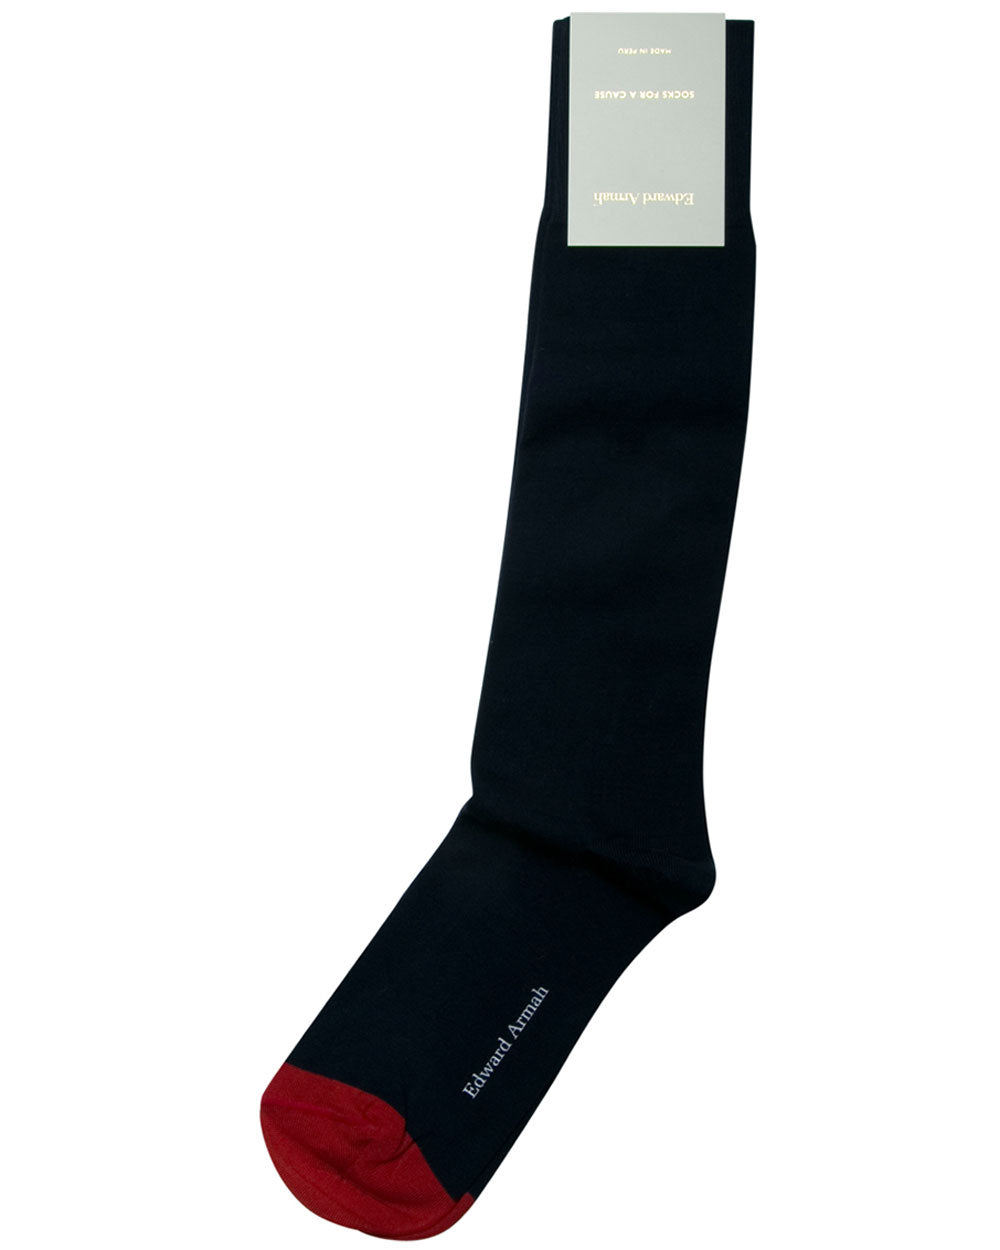 Over the Calf Socks in Navy and Red